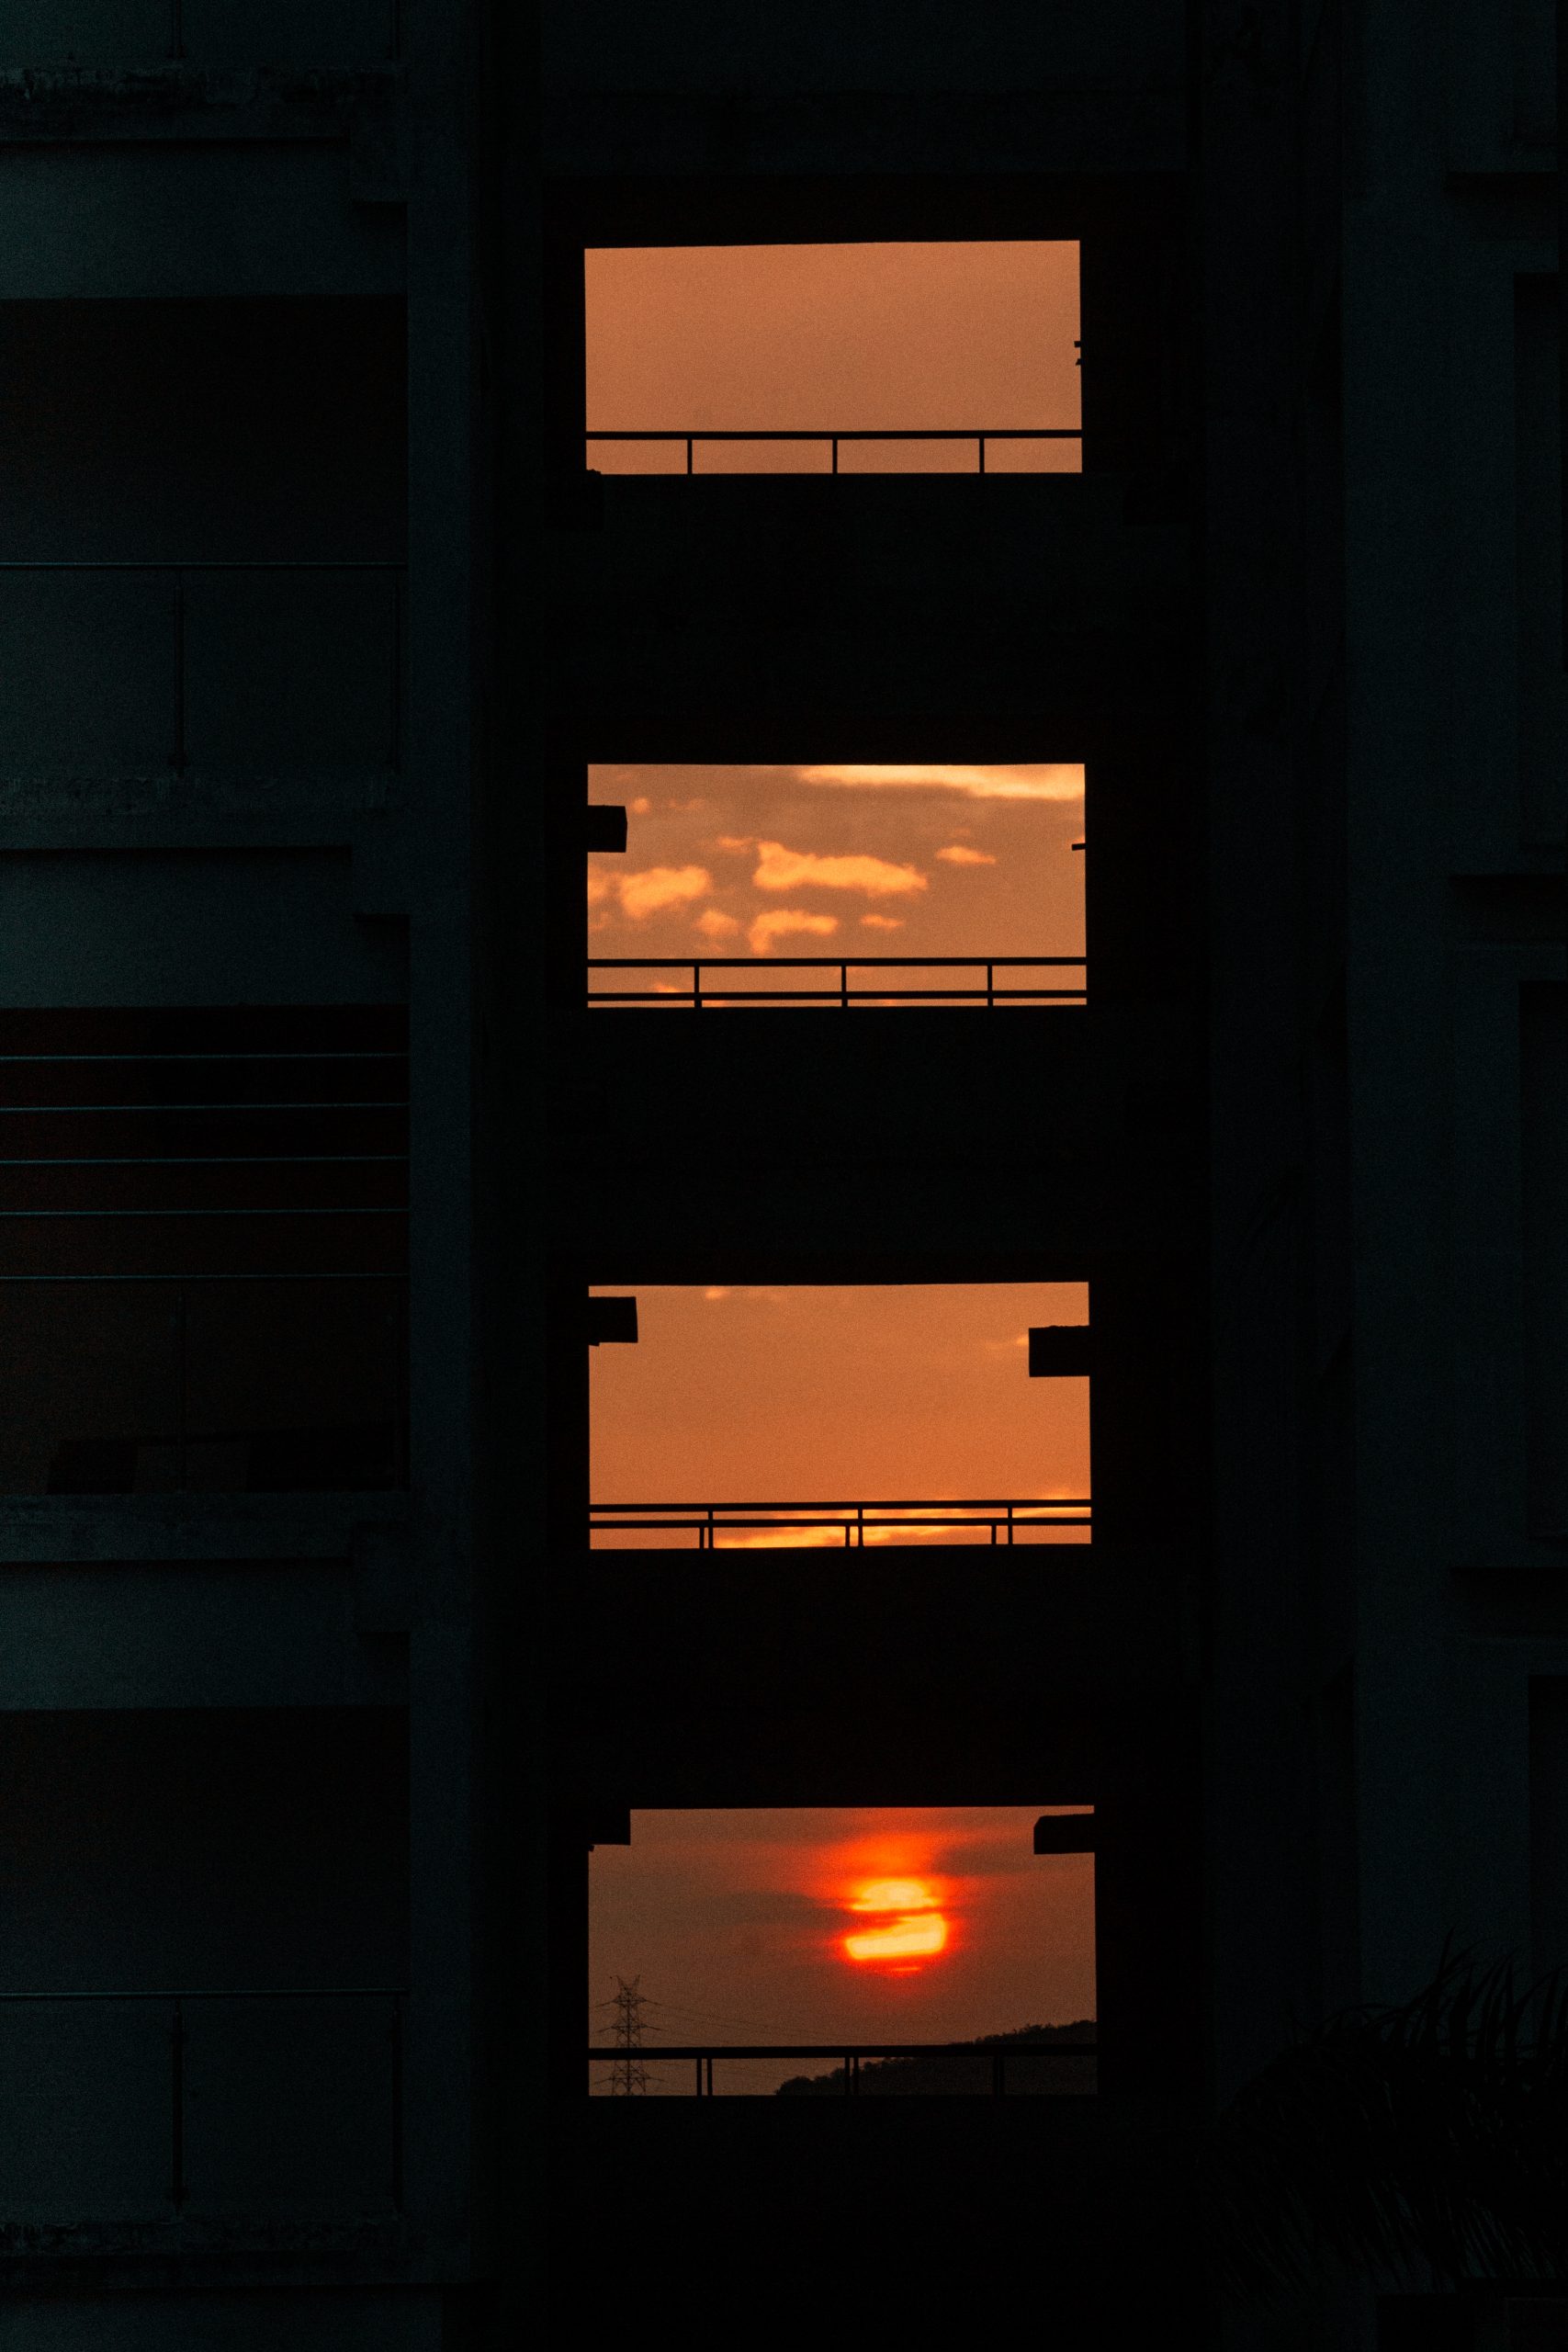 Sunset through the building